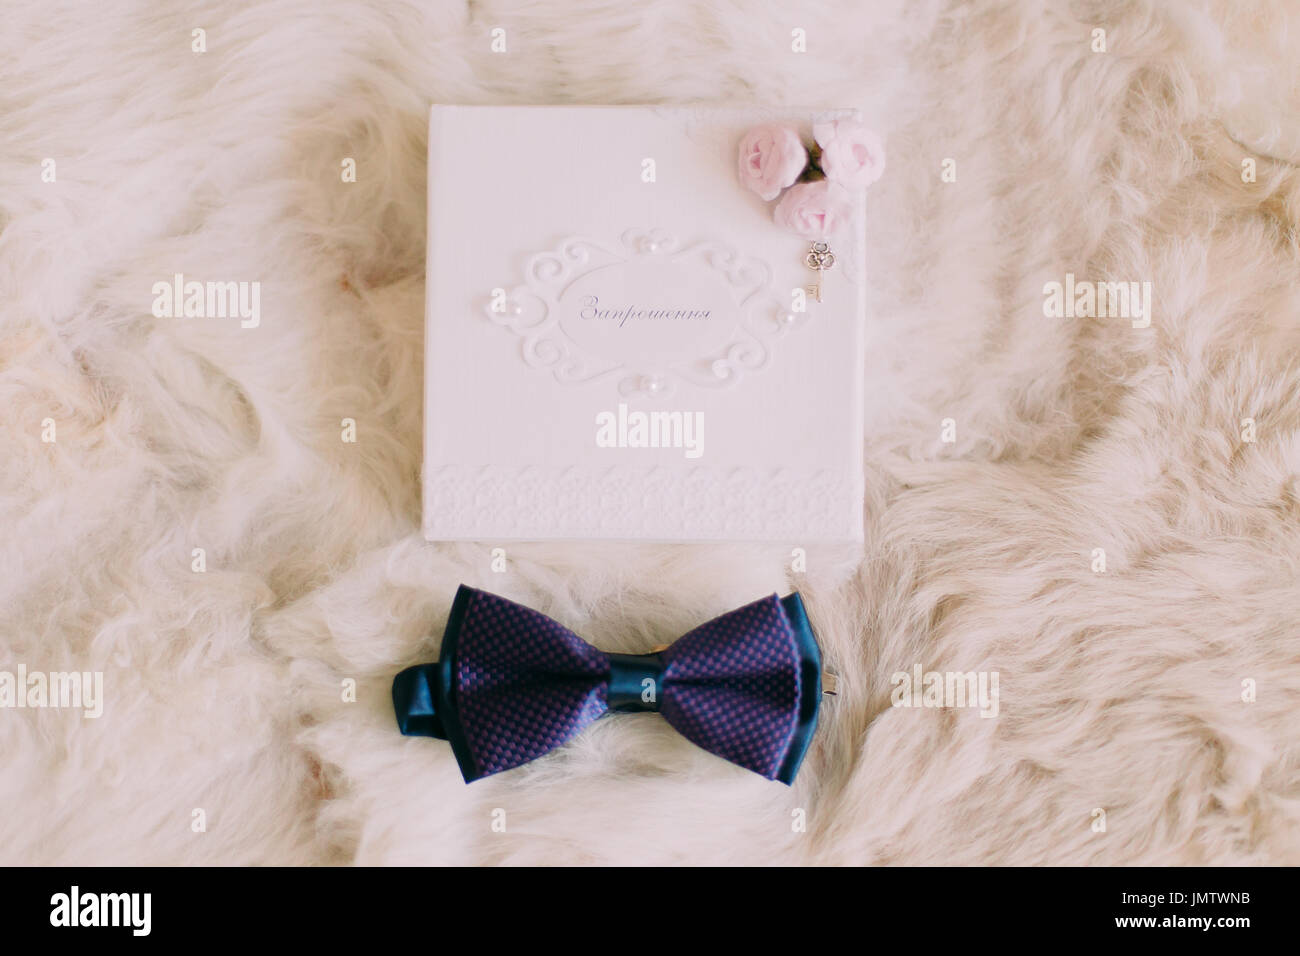 Blue bow tie and wedding invitation card isolated on white fur background. Stock Photo